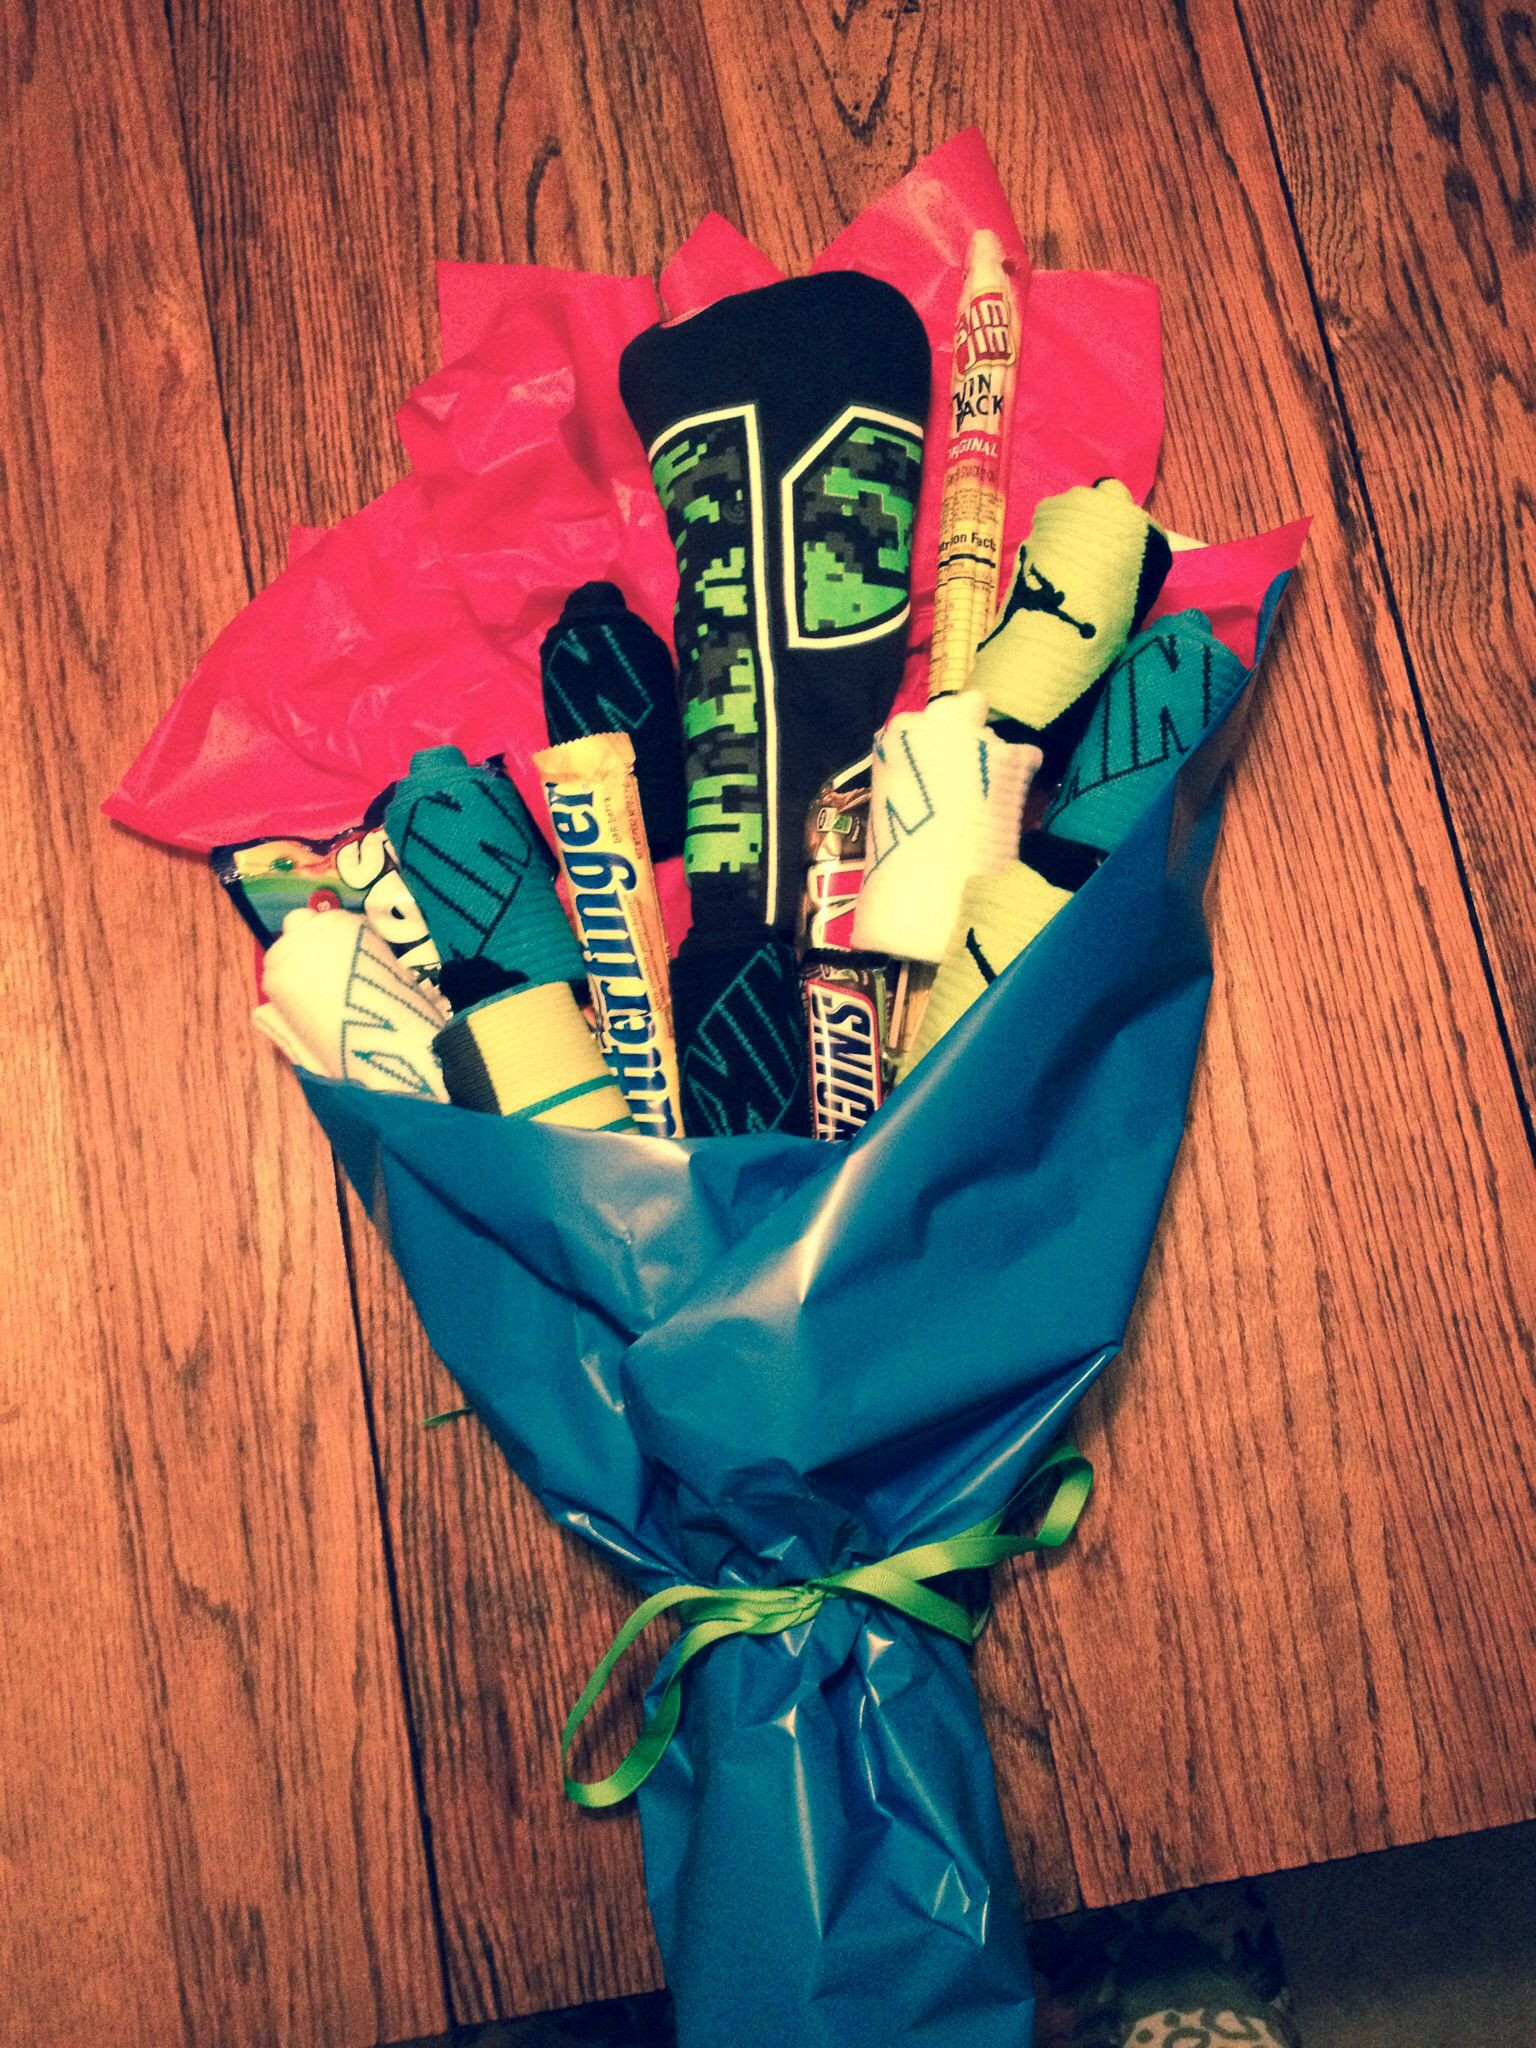 Valentine'S Day Gift Ideas For Boys
 Nike elite socks bouquet for my 12 year old with treats